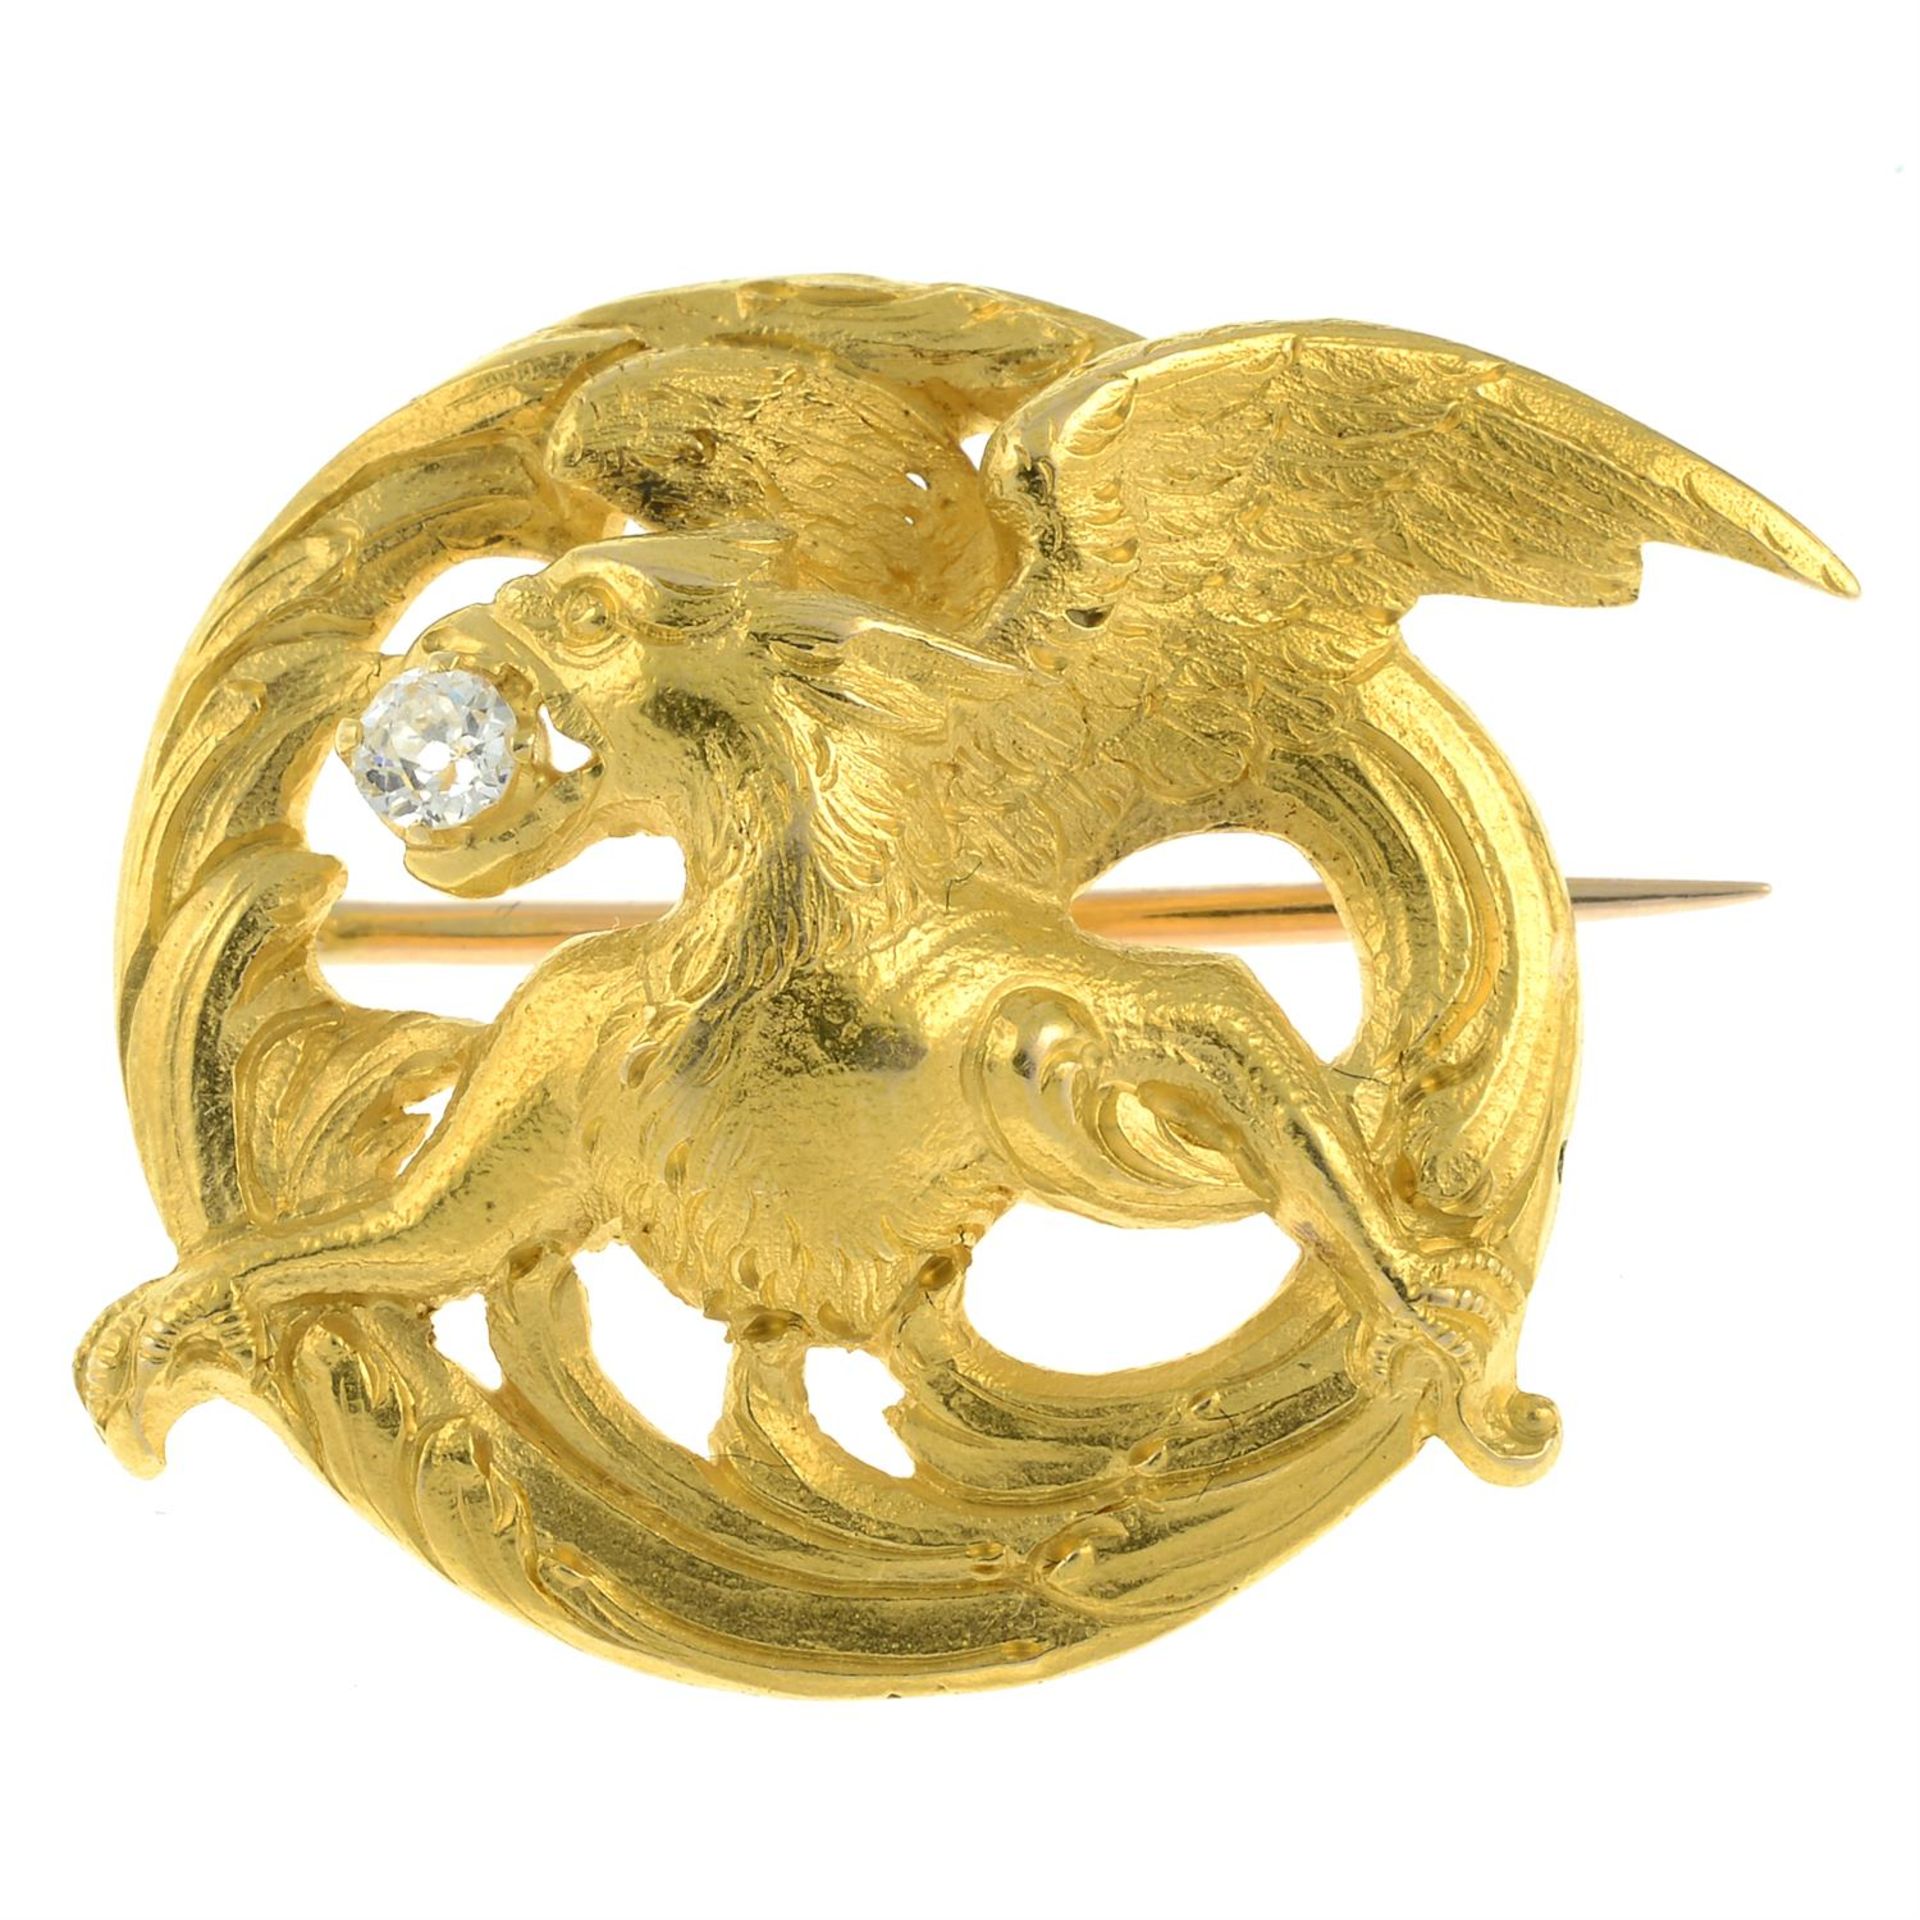 A late Victorian Art Nouveau 18ct gold griffin brooch, with old-cut diamond highlight. - Image 2 of 4